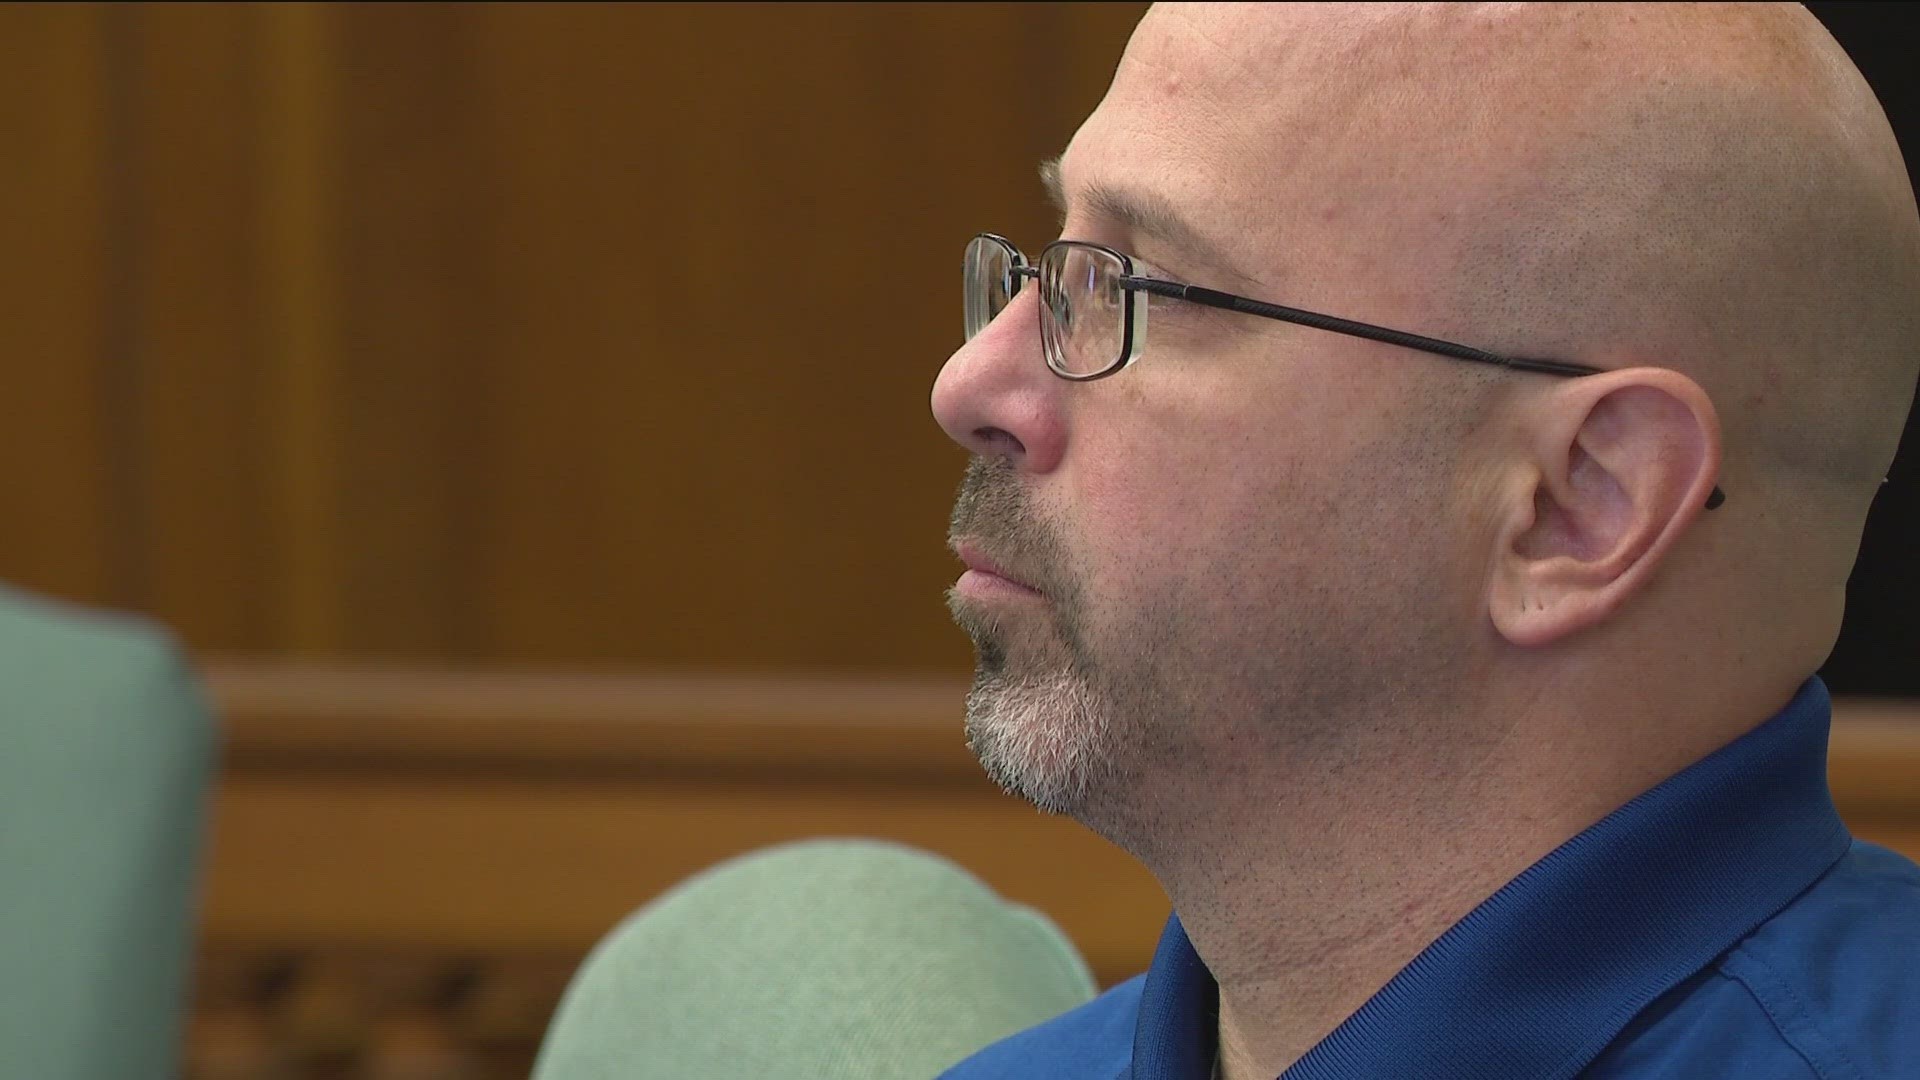 Eric Misch was convicted of murder and paroled in 2020. He is fighting for a new trial after prosecutors found new evidence that could have changed the outcome.